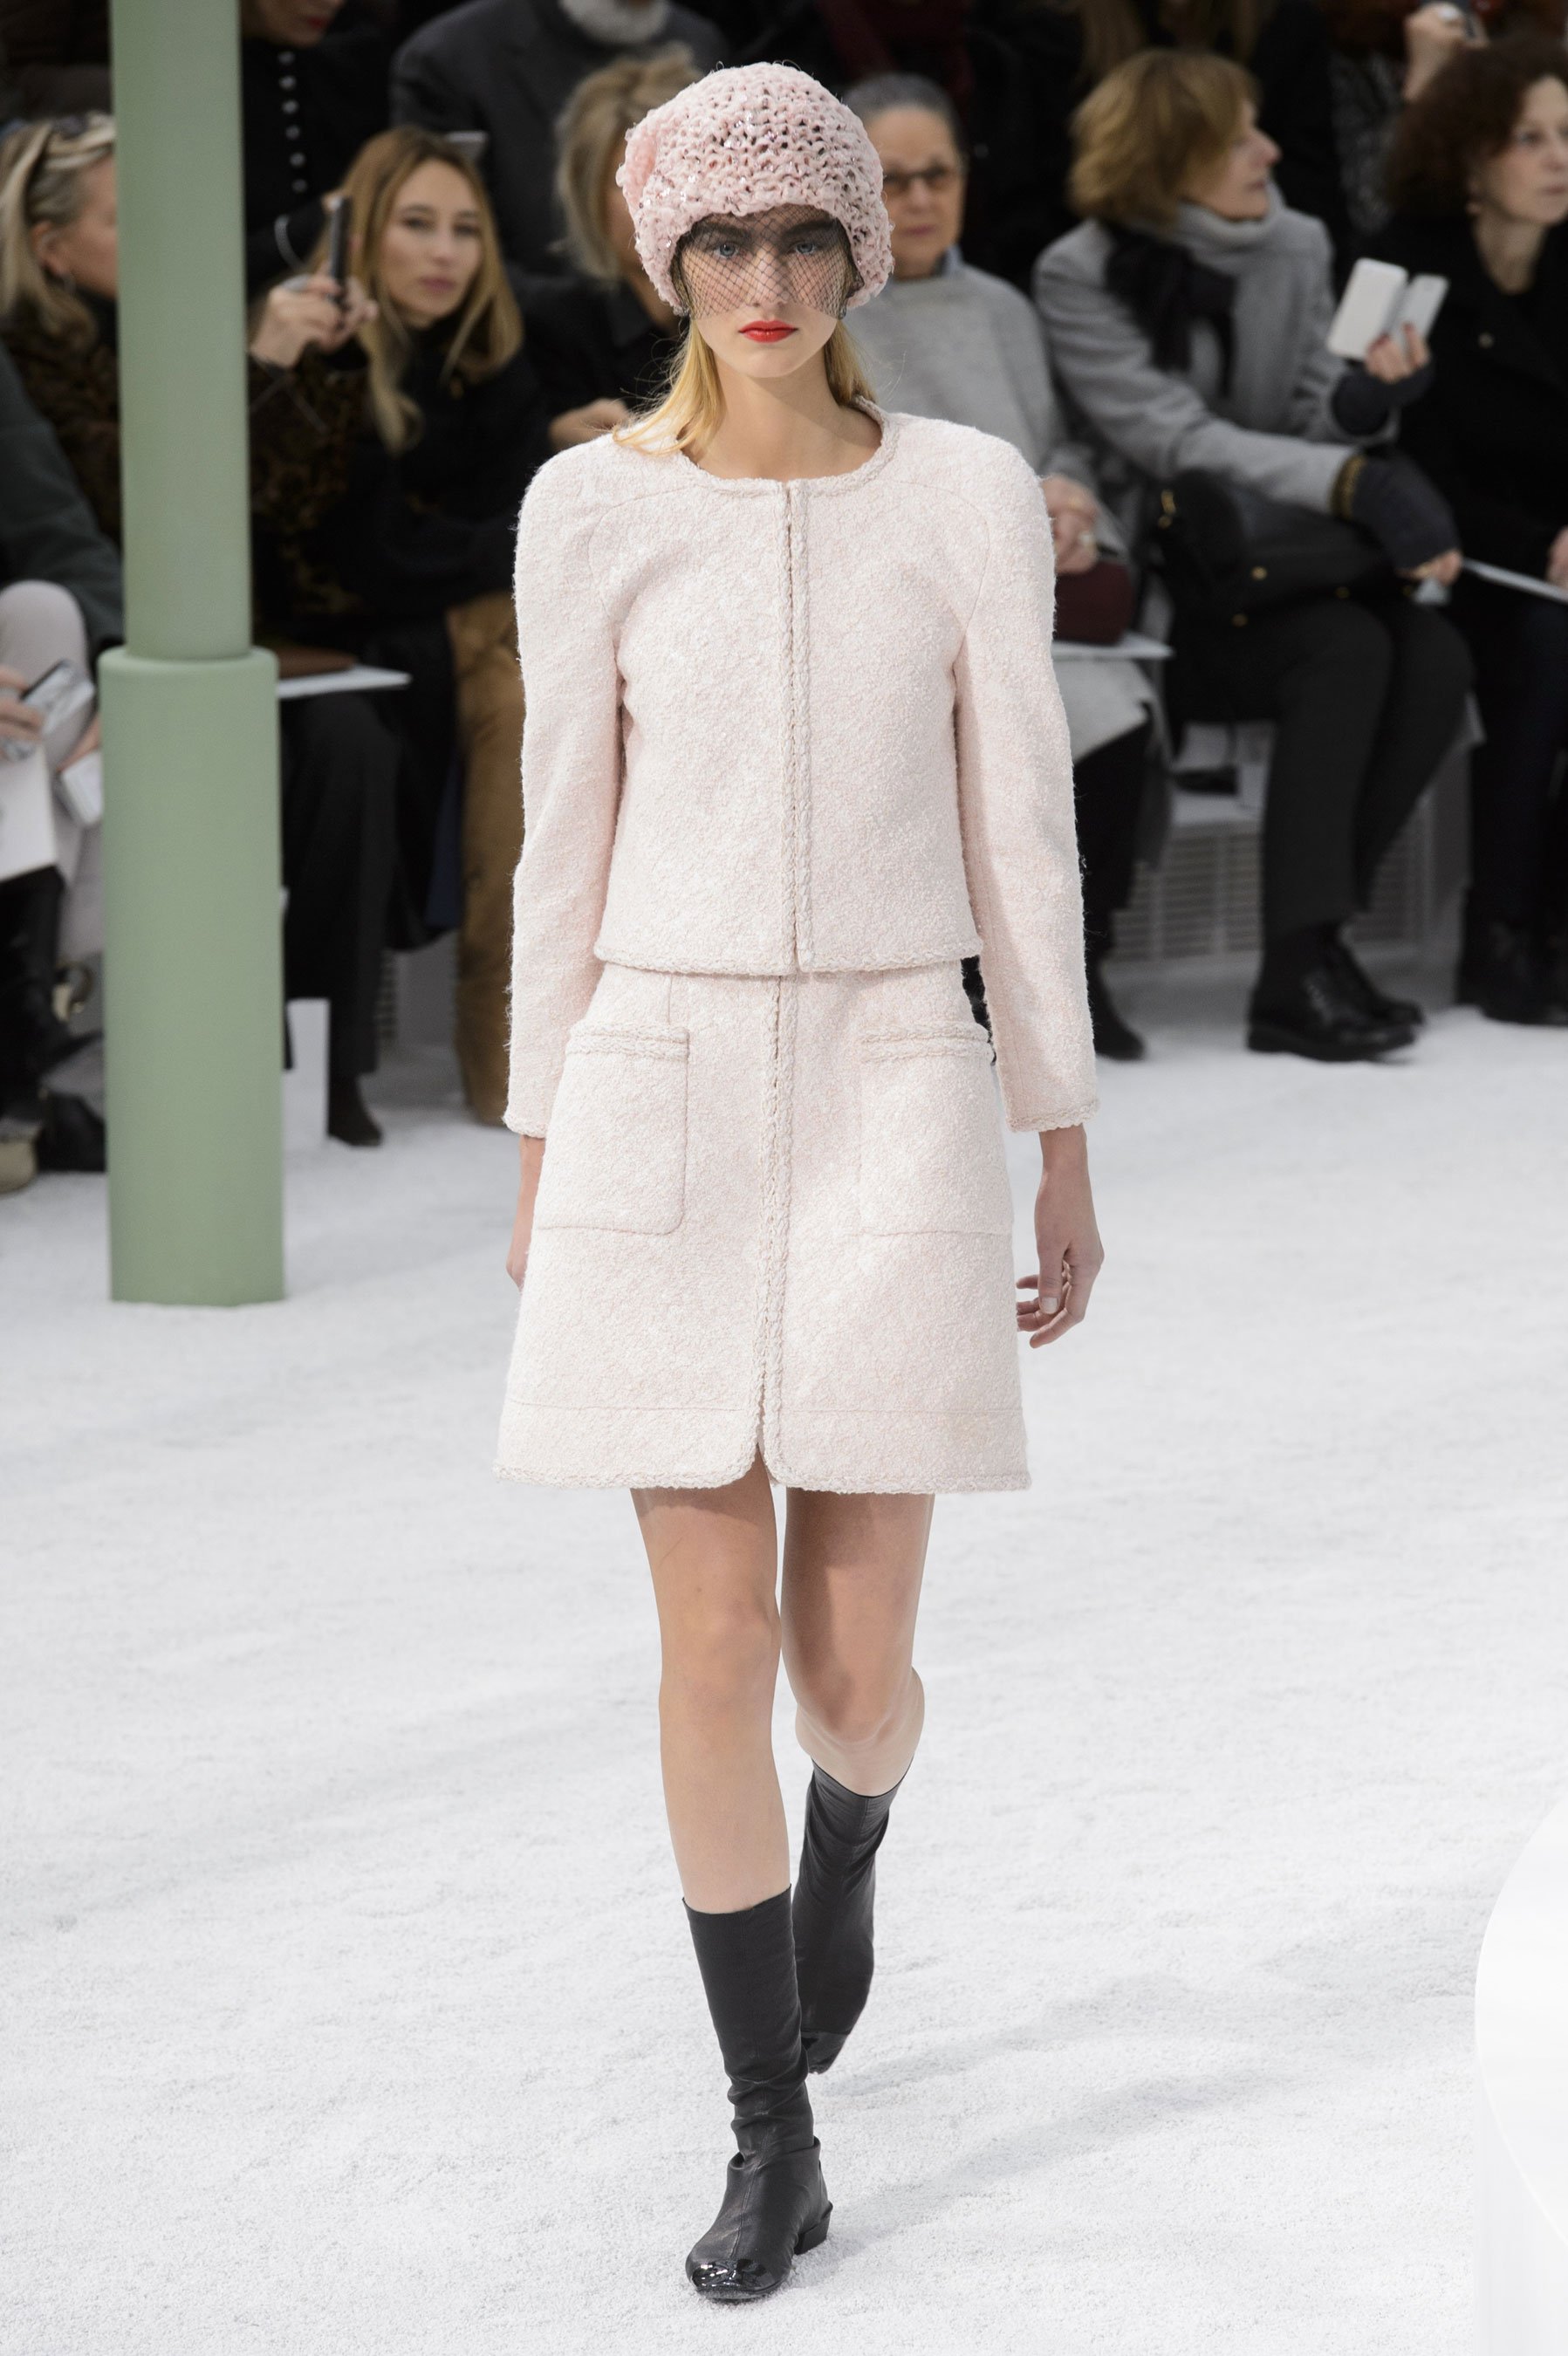 chanel haute couture spring 2015 pfw 11 maartje